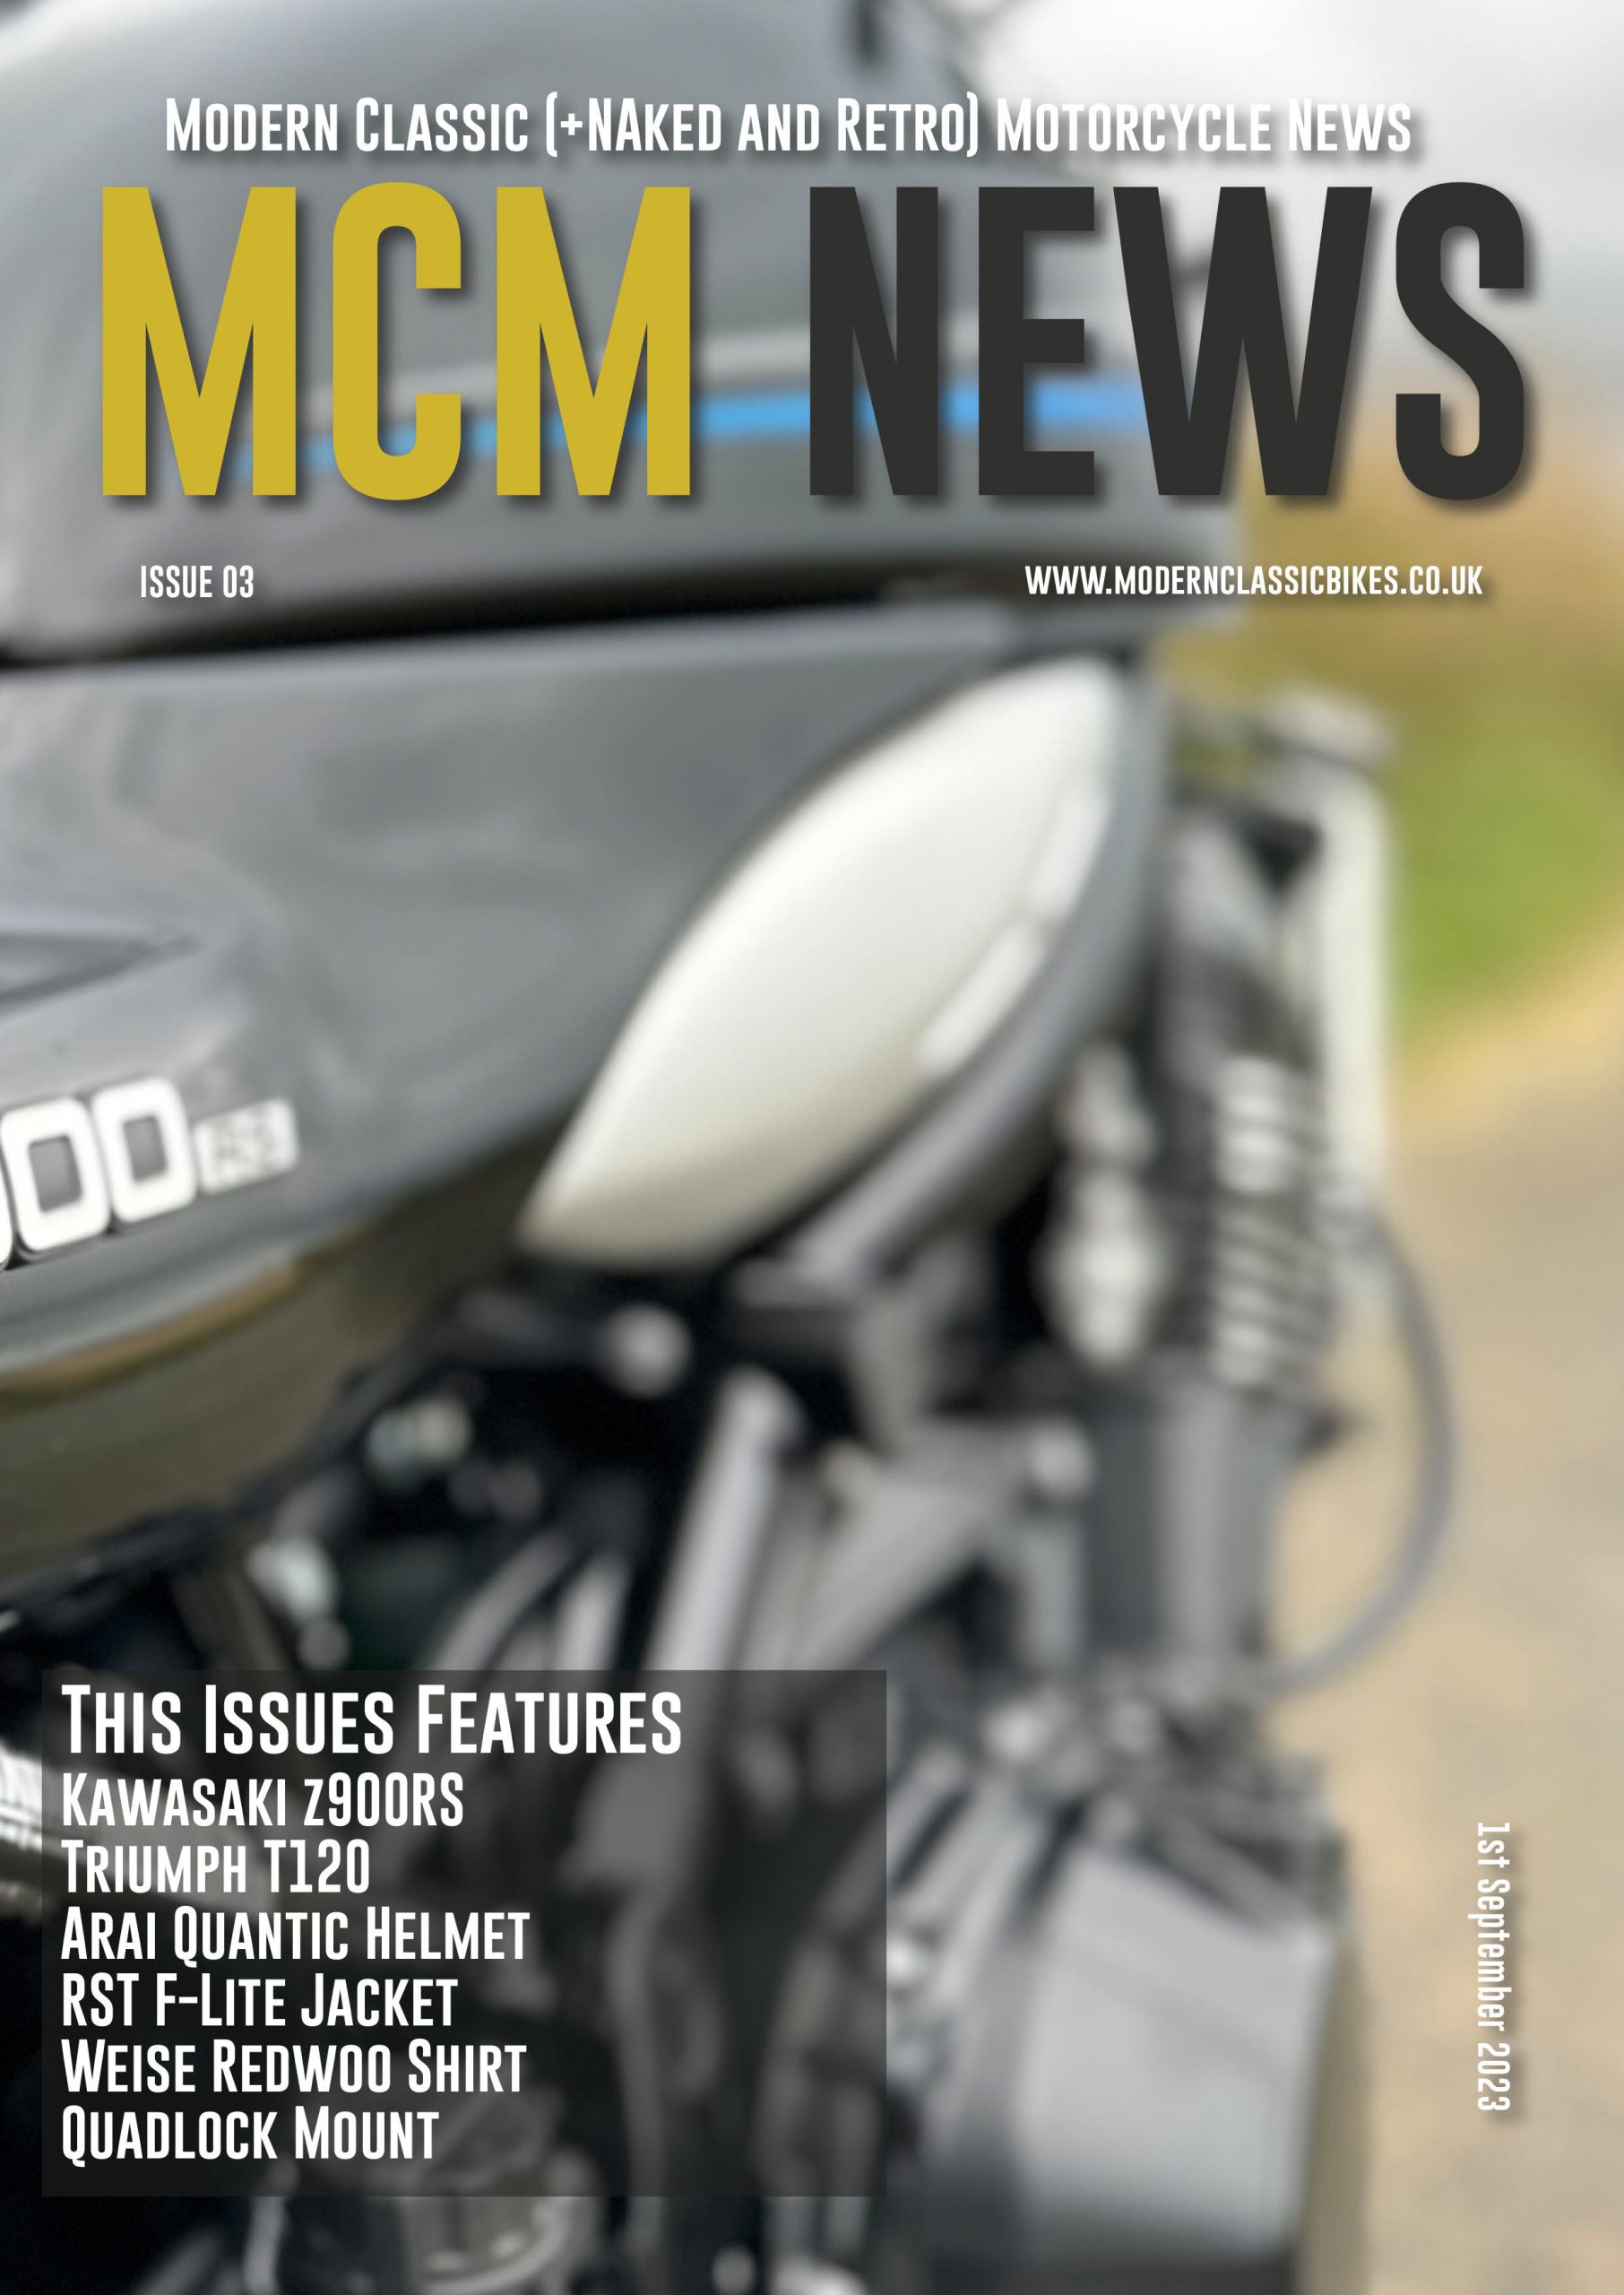 Modern Classic Motorcycle News Magazine - Issue 3